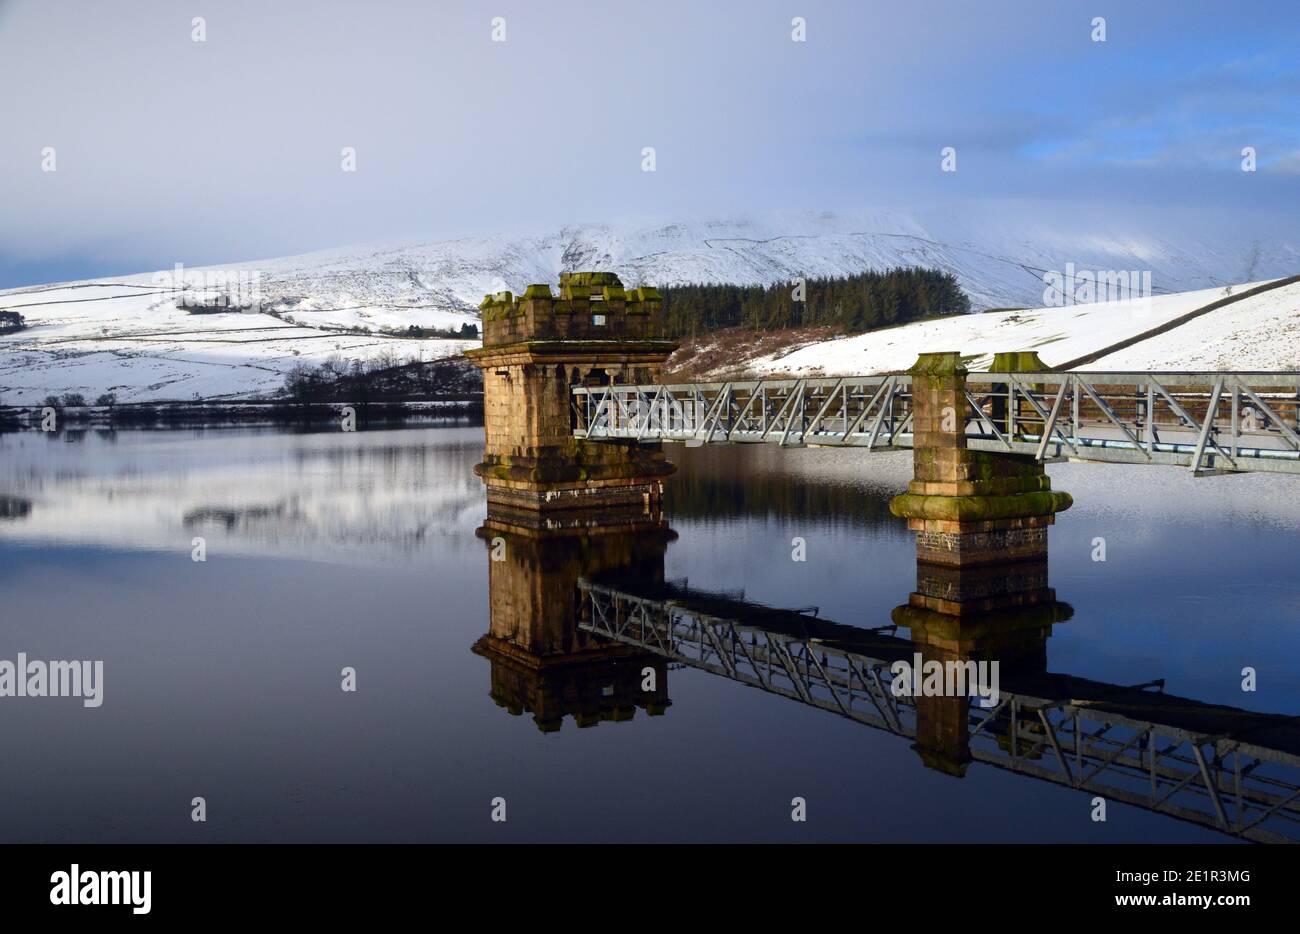 The Castellated Tower Value House on Lower Ogden Reservoir Dam near the Village of Barley from Path to Pendle Hill in Ogden Clough, Lancashire. UK. Stock Photo